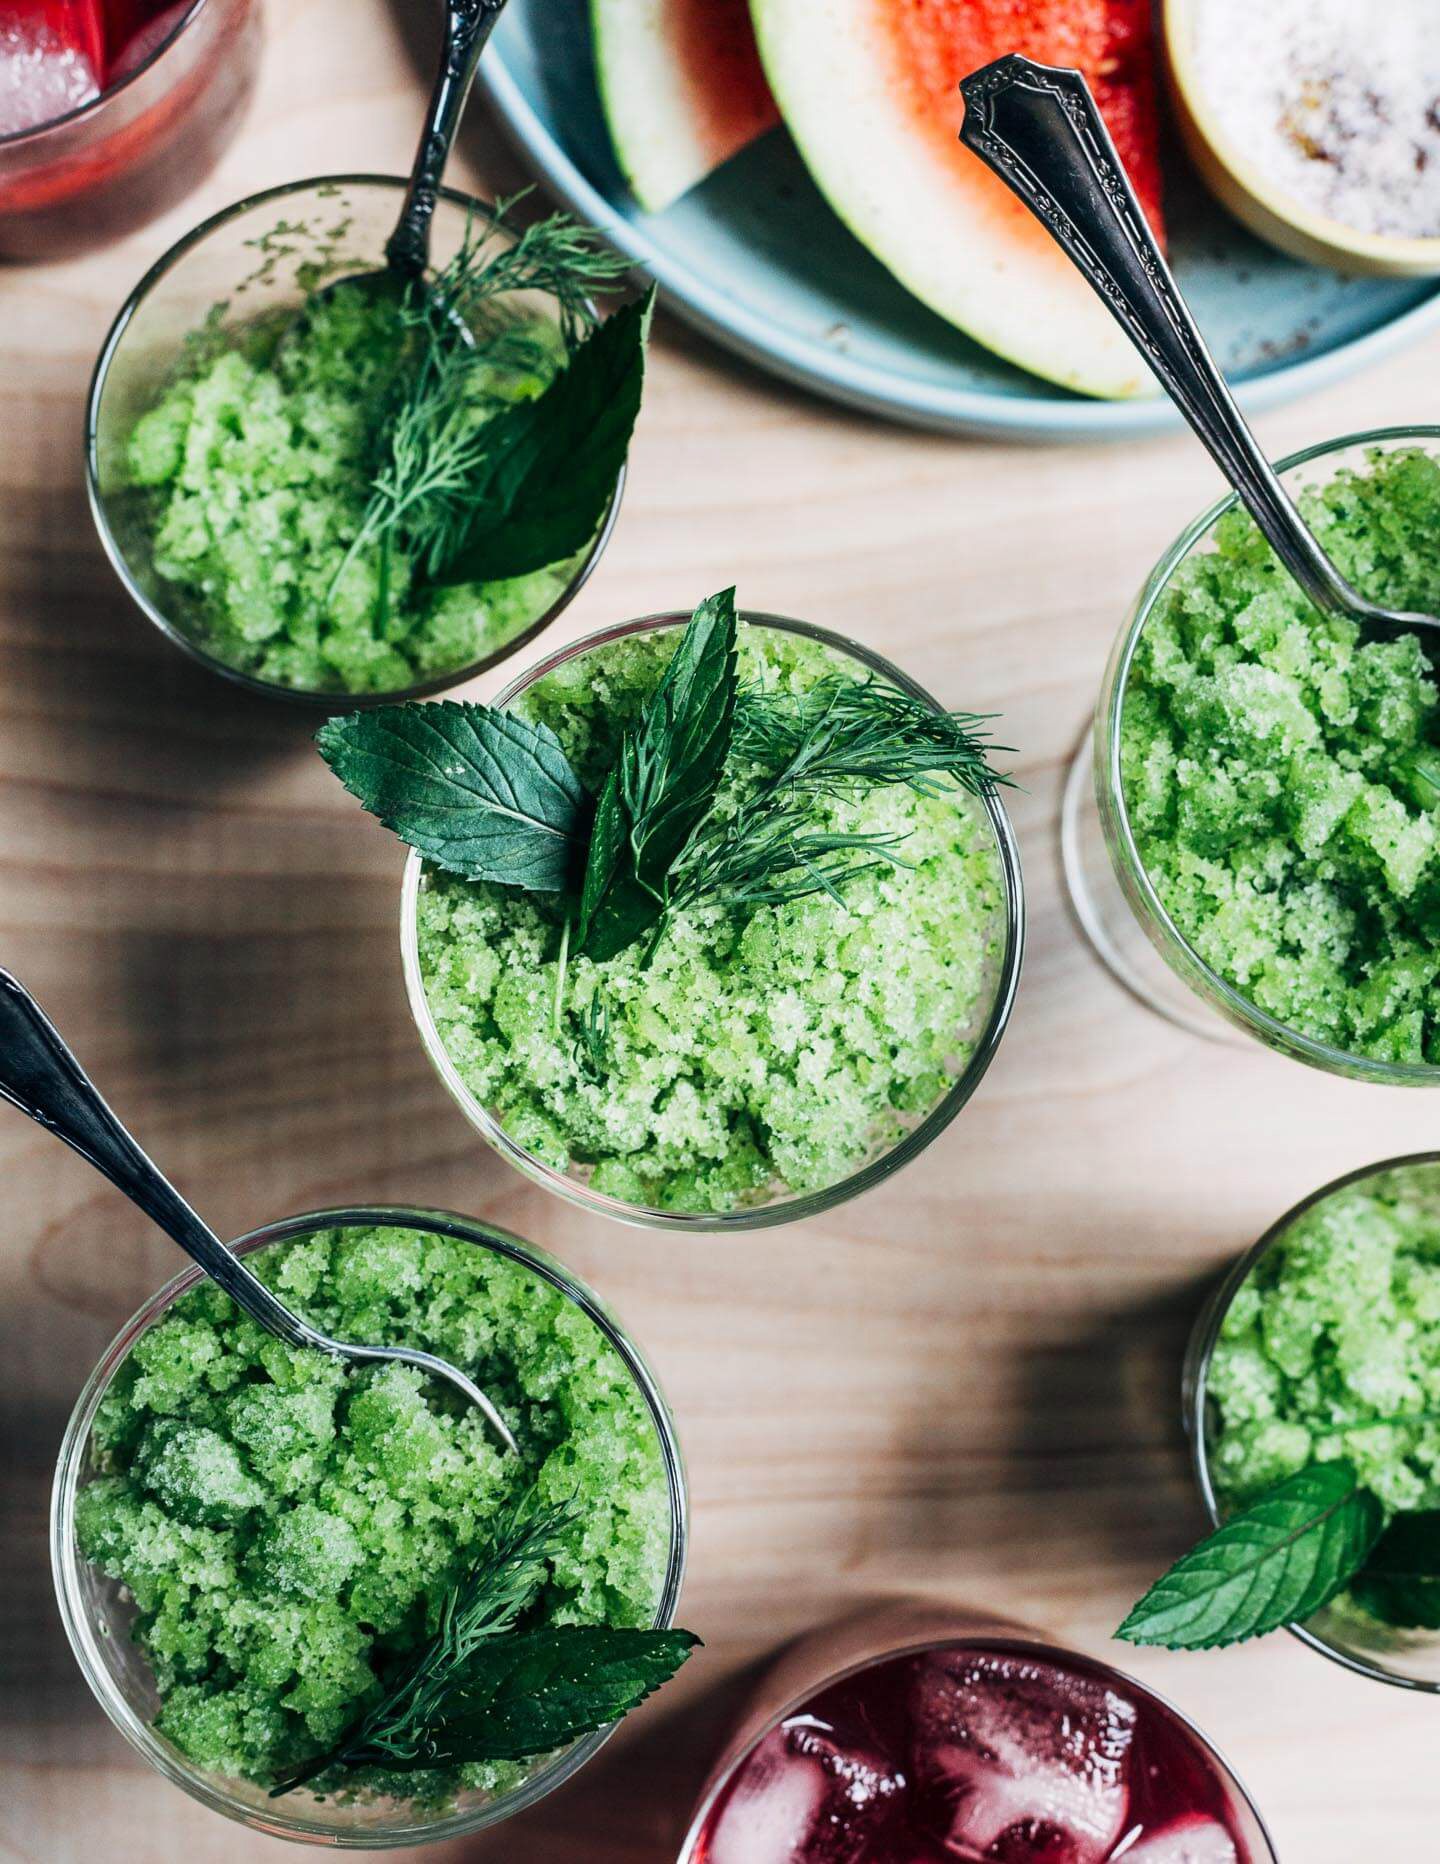 Little serving cups with green cucumber granita and herbs garnishes.